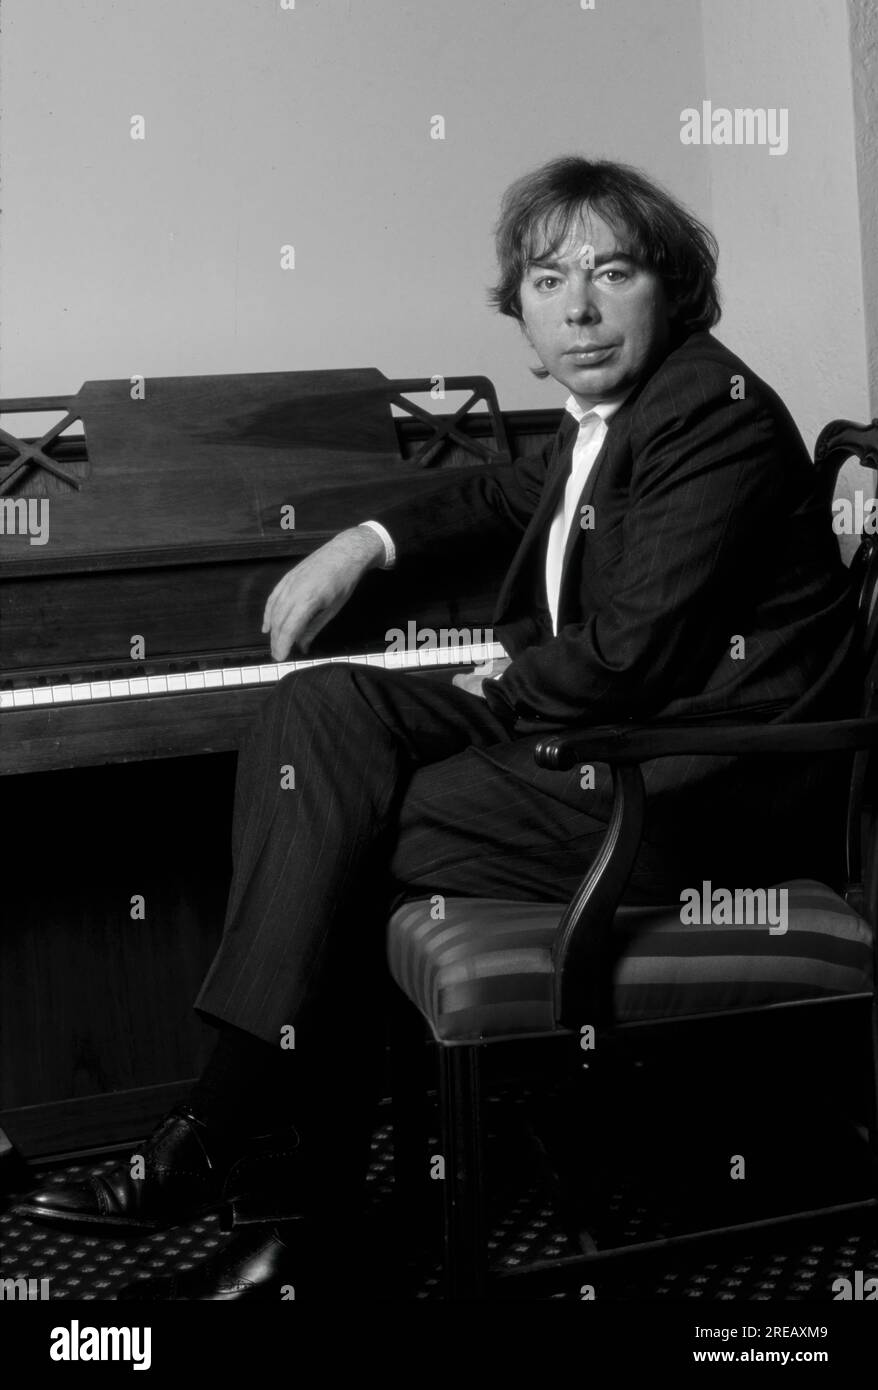 Andrew Lloyd Webber, is an English composer and impresario of musical theatre Several of his musicals have run for more than a decade both in the West End and on Broadway. He has composed 21 musicals, a song cycle, a set of variations, two film scores, and a Latin Requiem Mass.  Several of his songs have been widely recorded and were successful outside of their parent musicals, such as 'Memory' from Cats, 'The Music of the Night' and 'All I Ask of You' from The Phantom of the Opera, 'I Don't Know How to Love Him' from Jesus Christ Superstar. Stock Photo